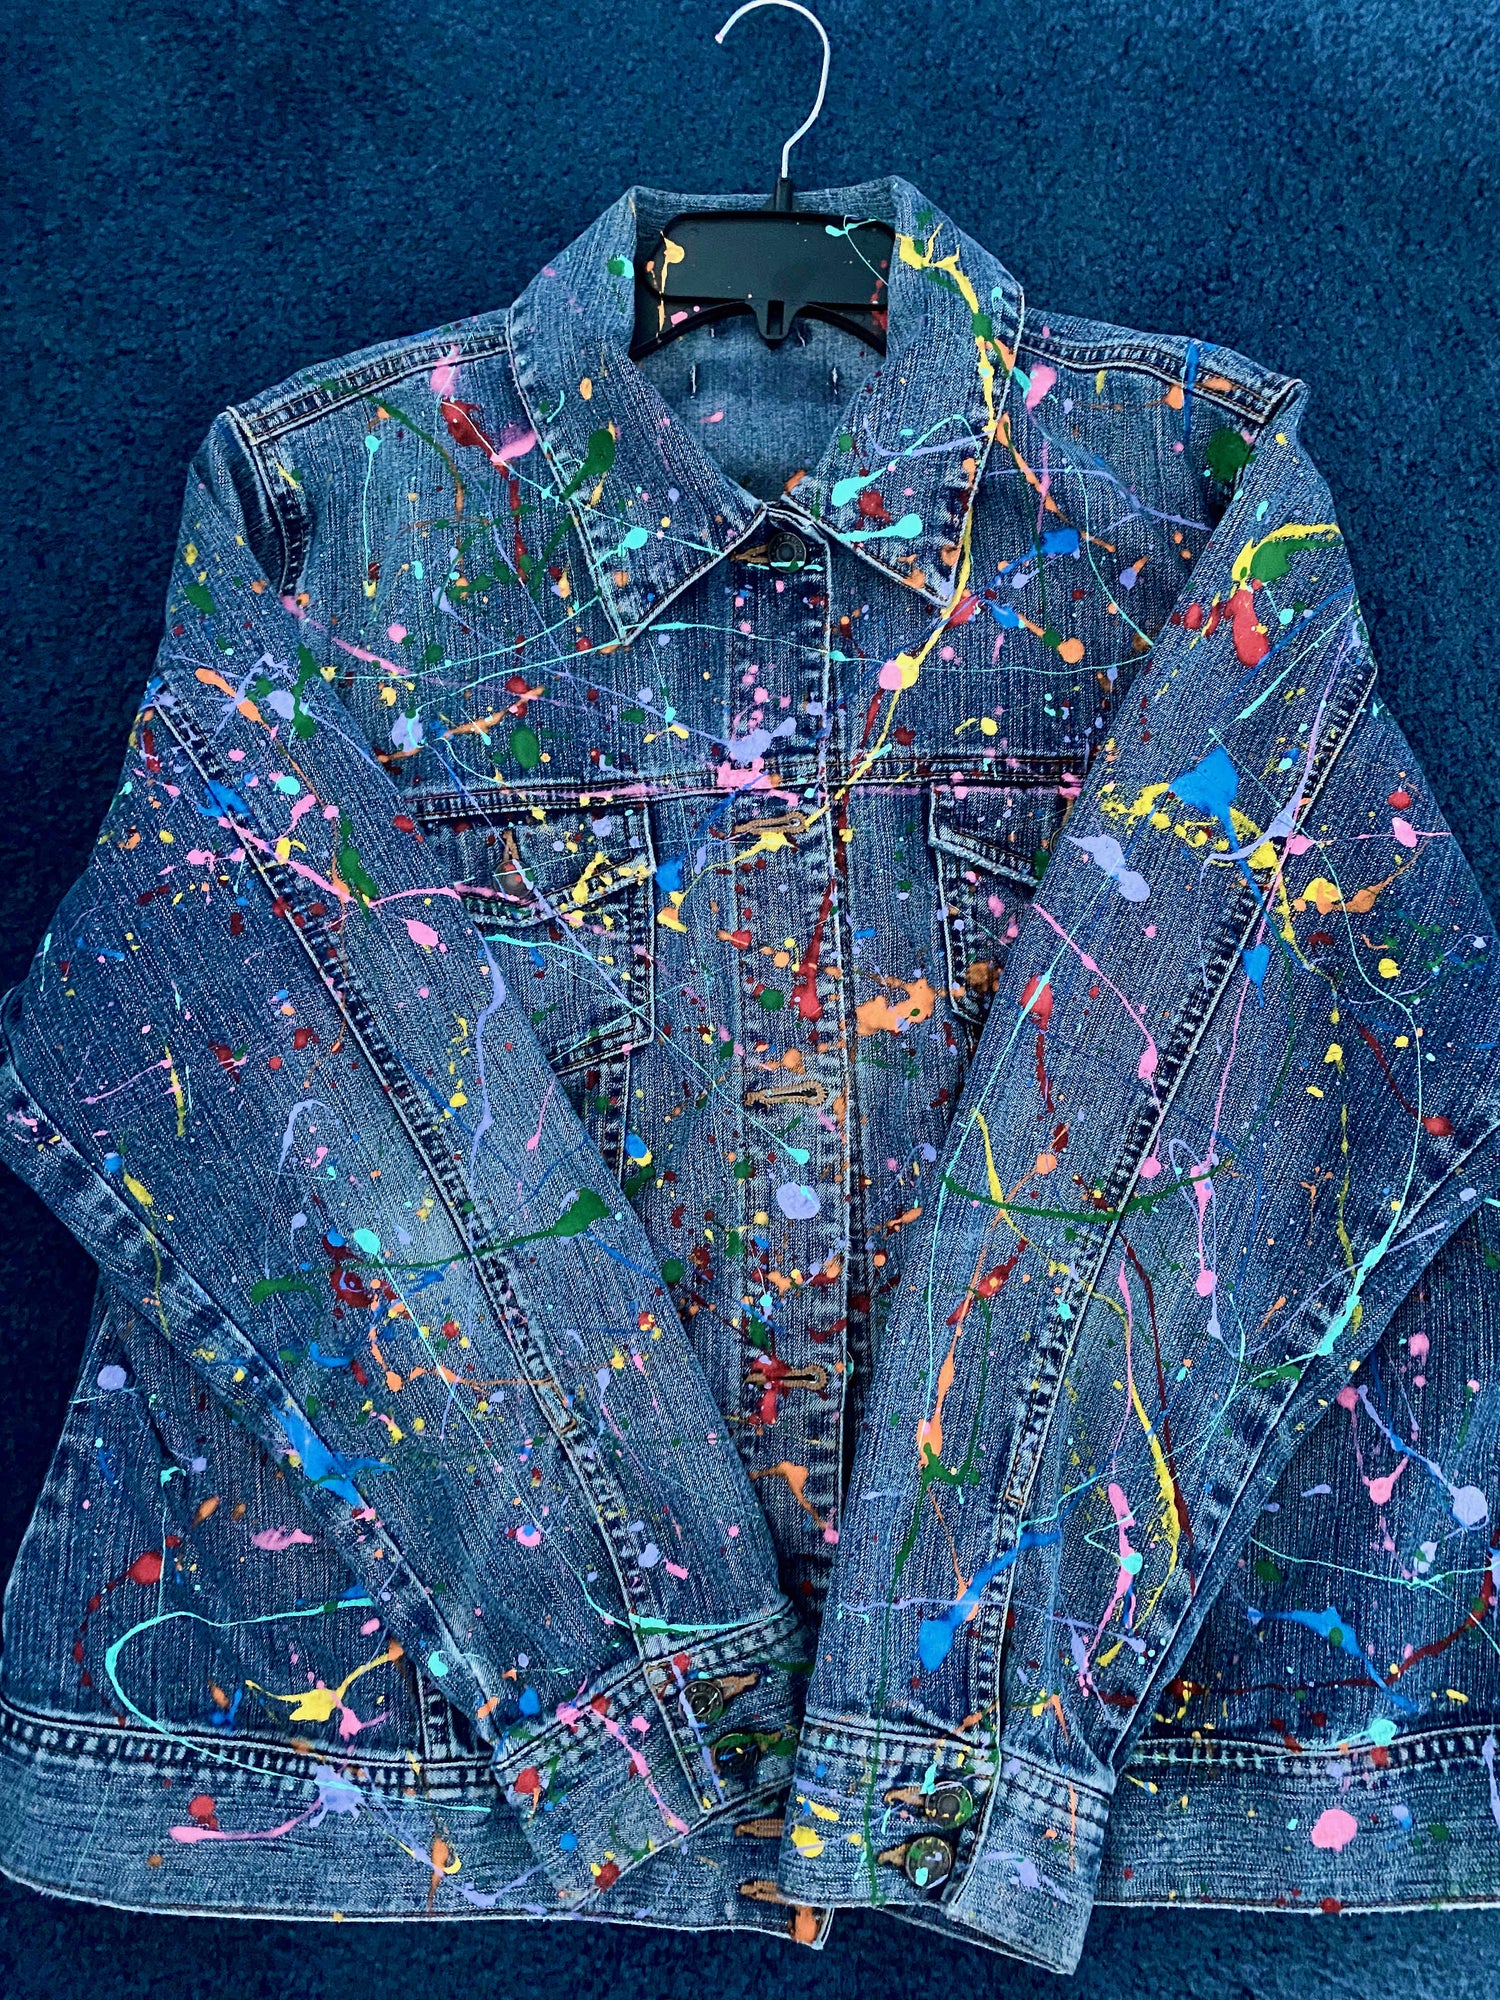 This is a one of kind custom splatter paint denim jacket that is meant to make a statement. This jacket was hand painted and carefully designed. 